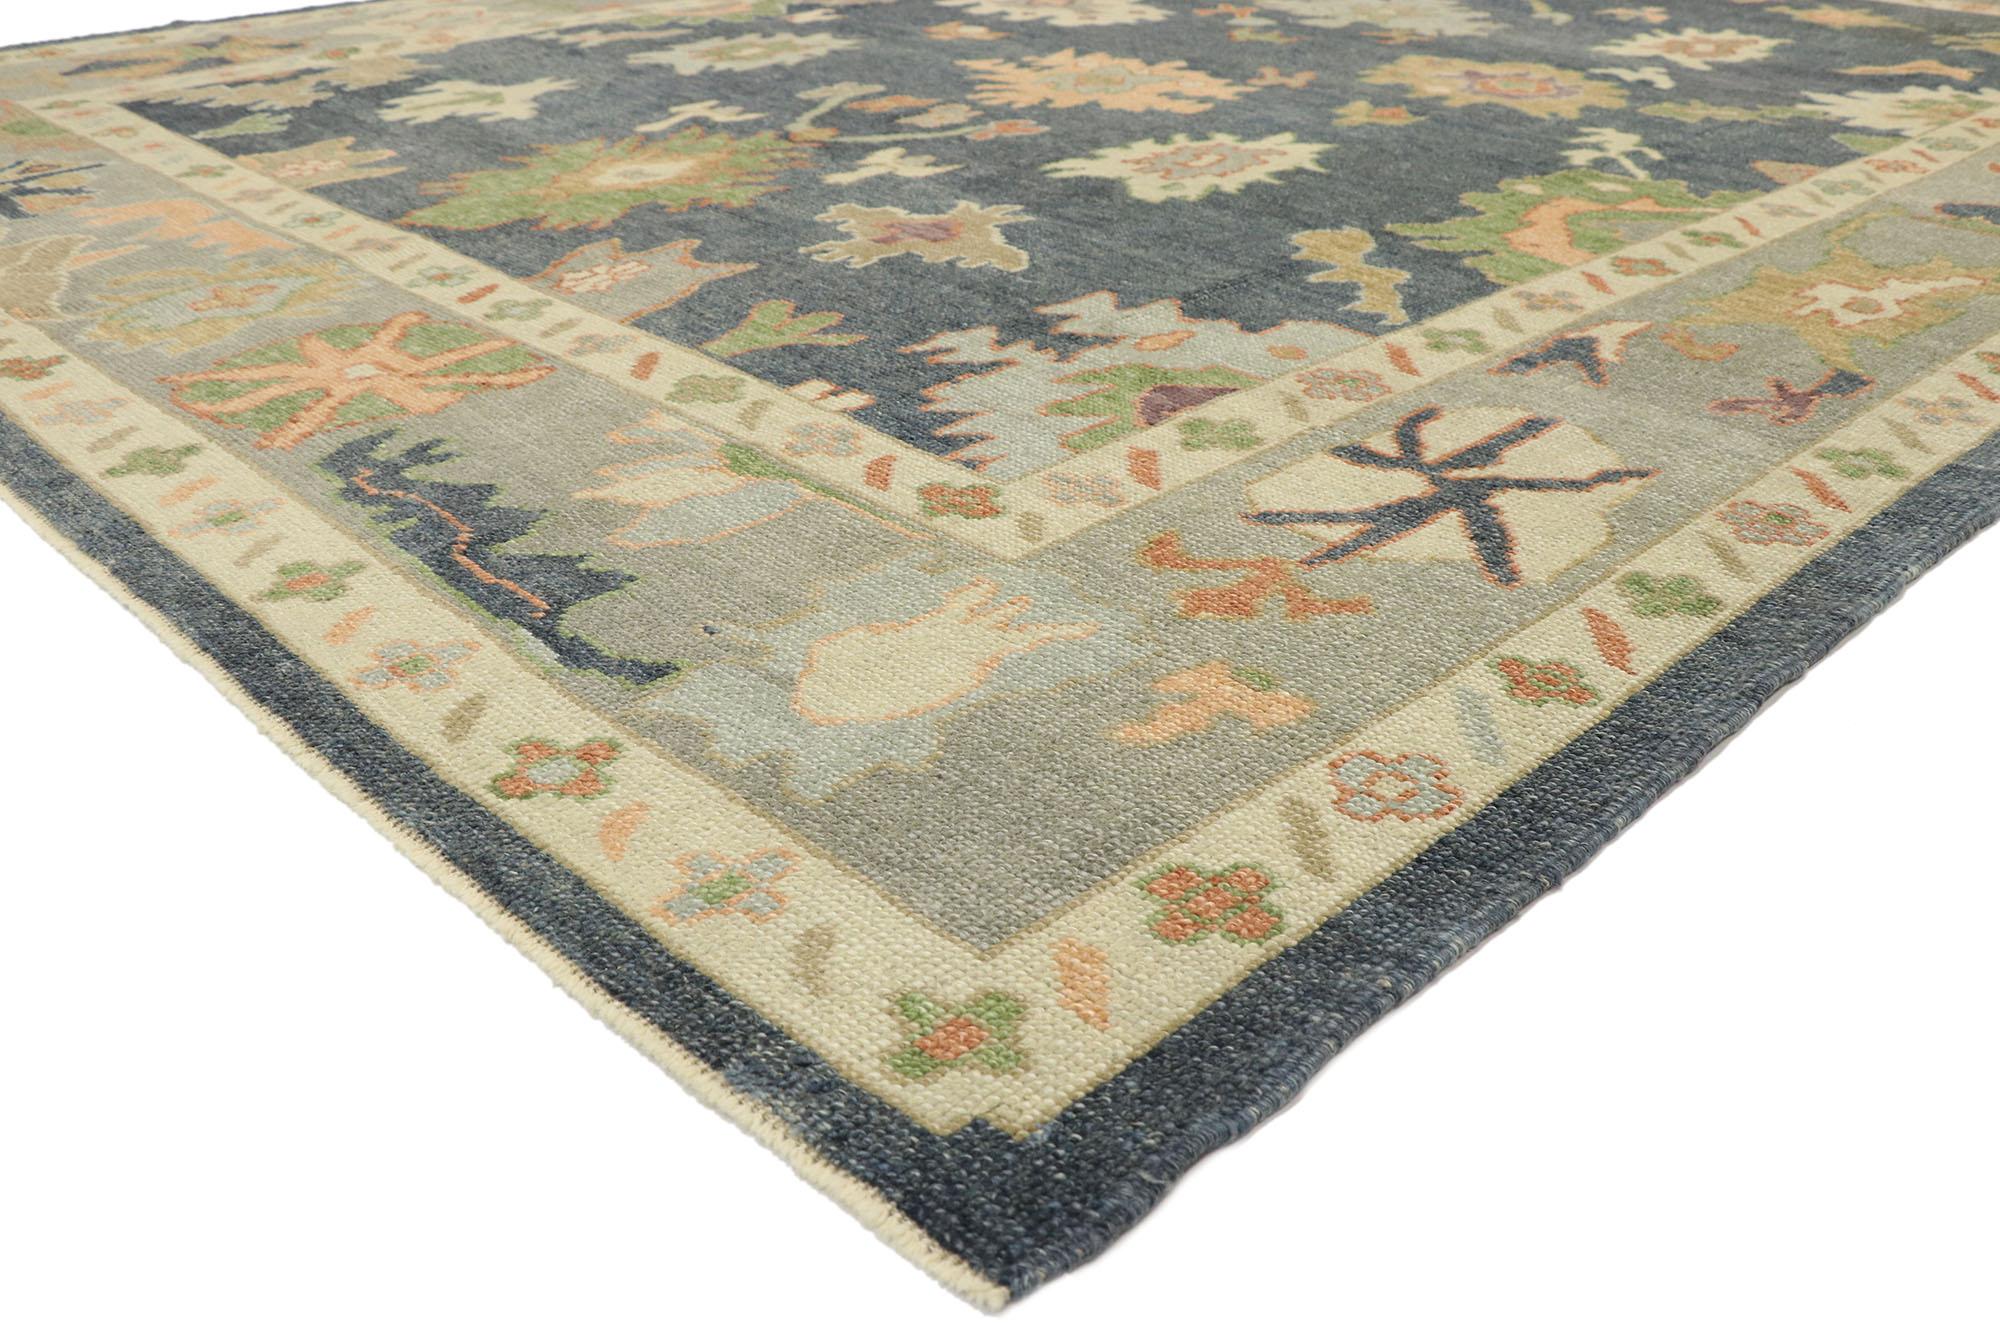 52862, new contemporary Turkish Oushak rug with modern transitional style. Blending elements from the modern world with light and airy colors, this hand knotted wool contemporary Turkish Oushak rug will boost the coziness factor in nearly any space.